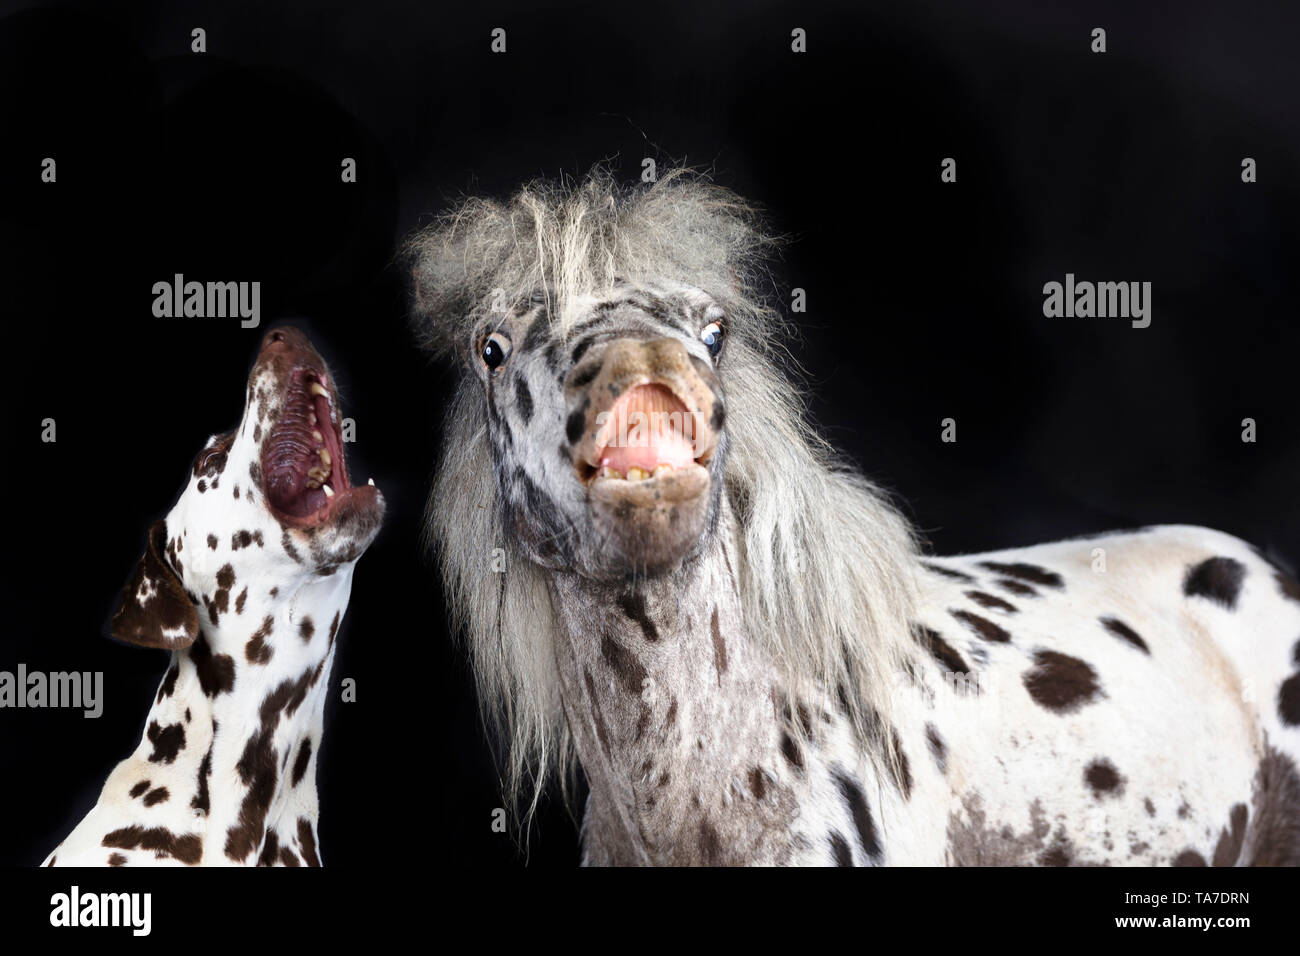 Miniature Appaloosa and Dalmatian dog. Adult horse neighing and adult dog howling. Studio picture against a black background. Germany Stock Photo